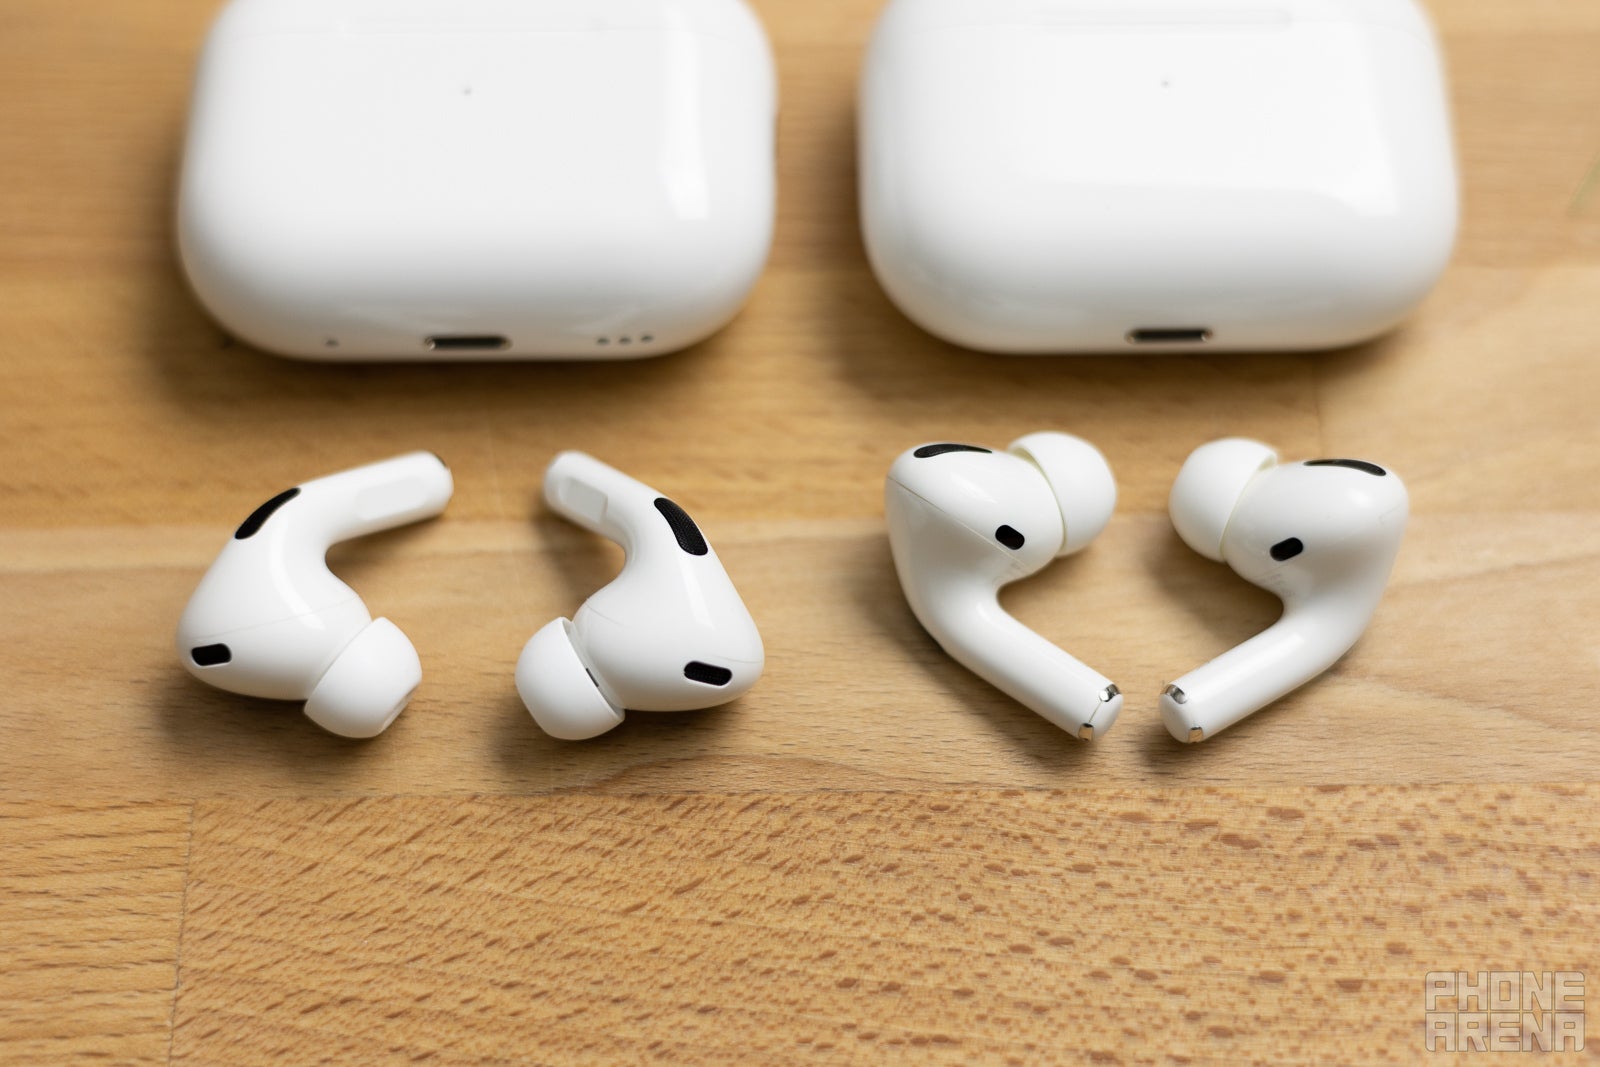 You can now buy an AirPods Pro 2 case without the earbuds